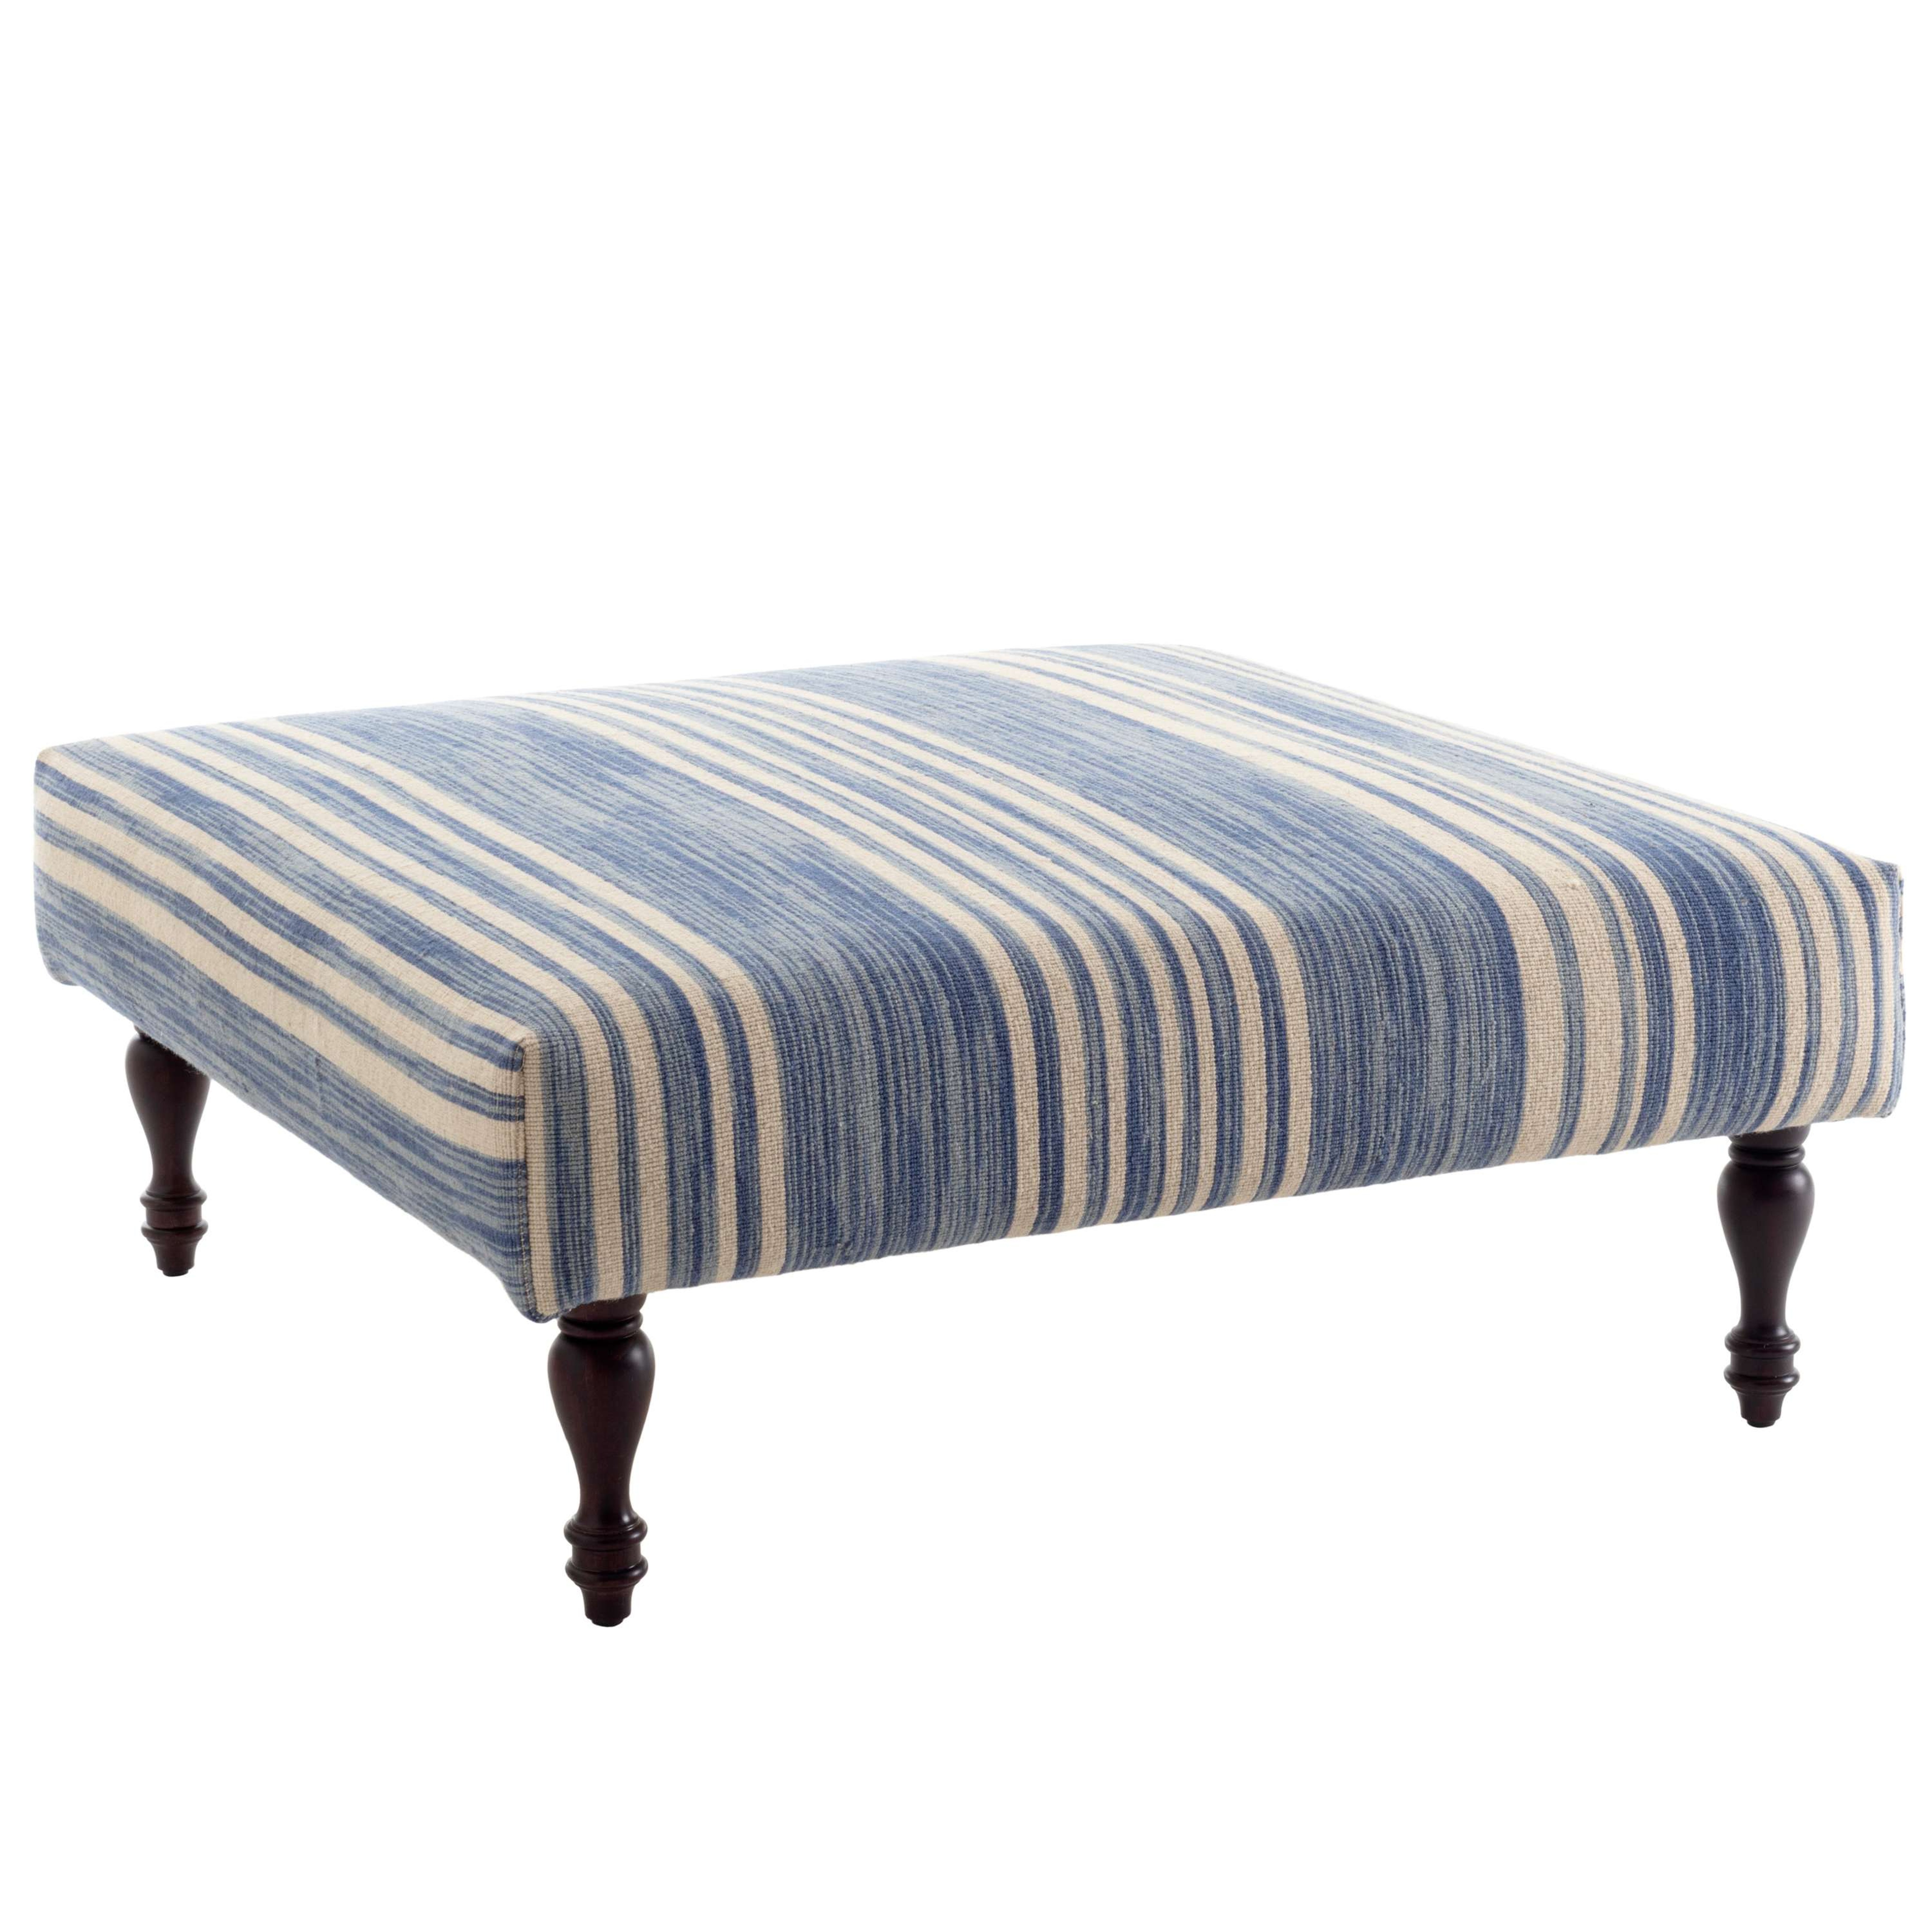 COTTAGE STRIPE FRENCH BLUE TURNED TOBACCO RUG OTTOMAN - Dash and Albert